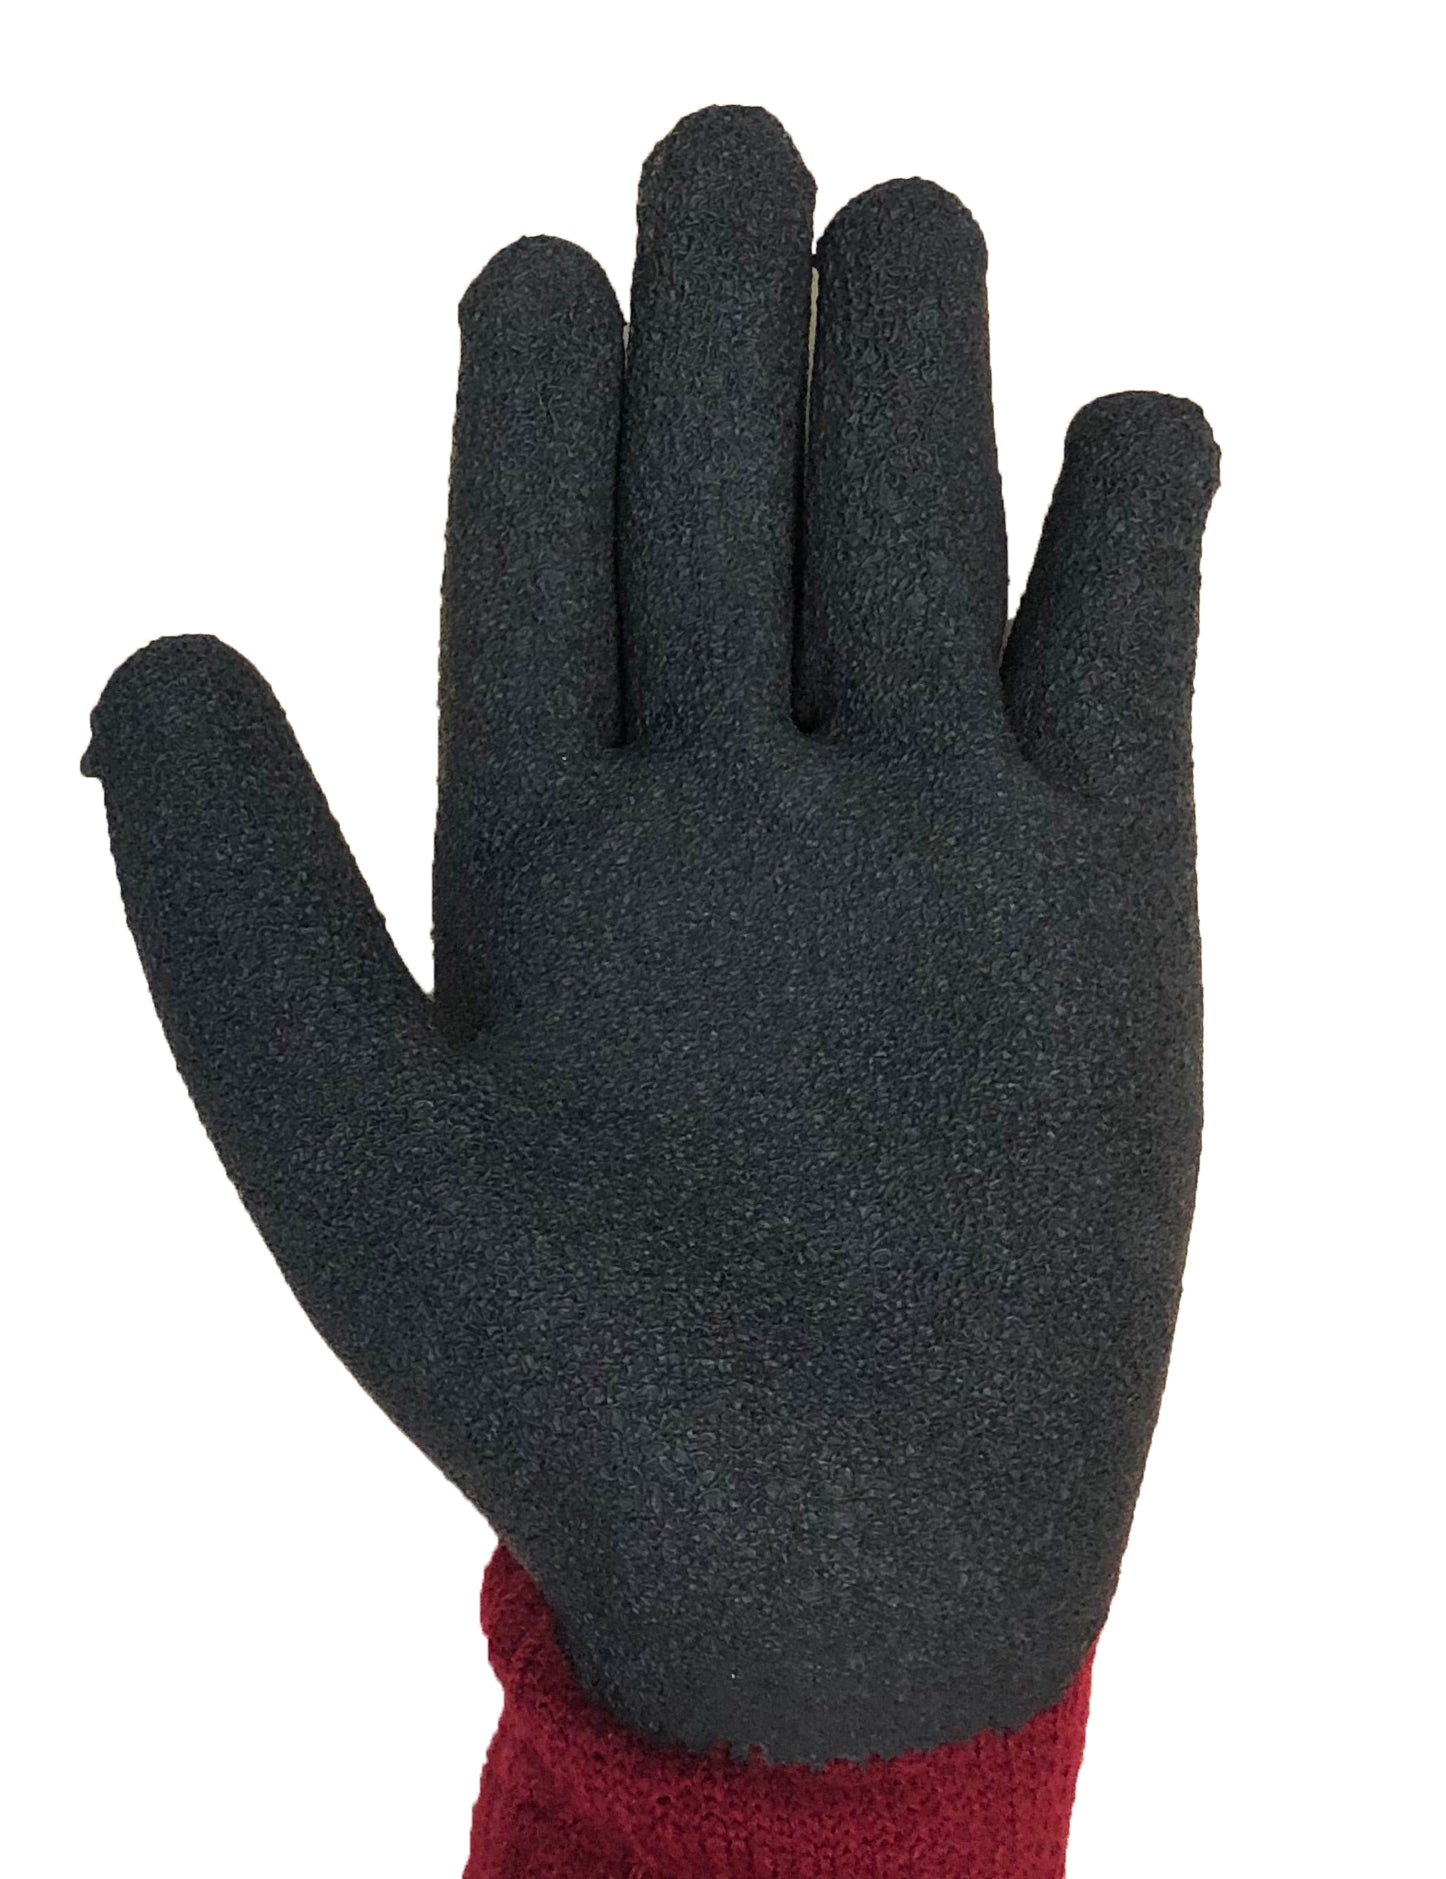 TA321 Chilly Grip H2O Waterproof Fully Dipped Nylon Shell Insulated Gl –  Oregon Glove Company